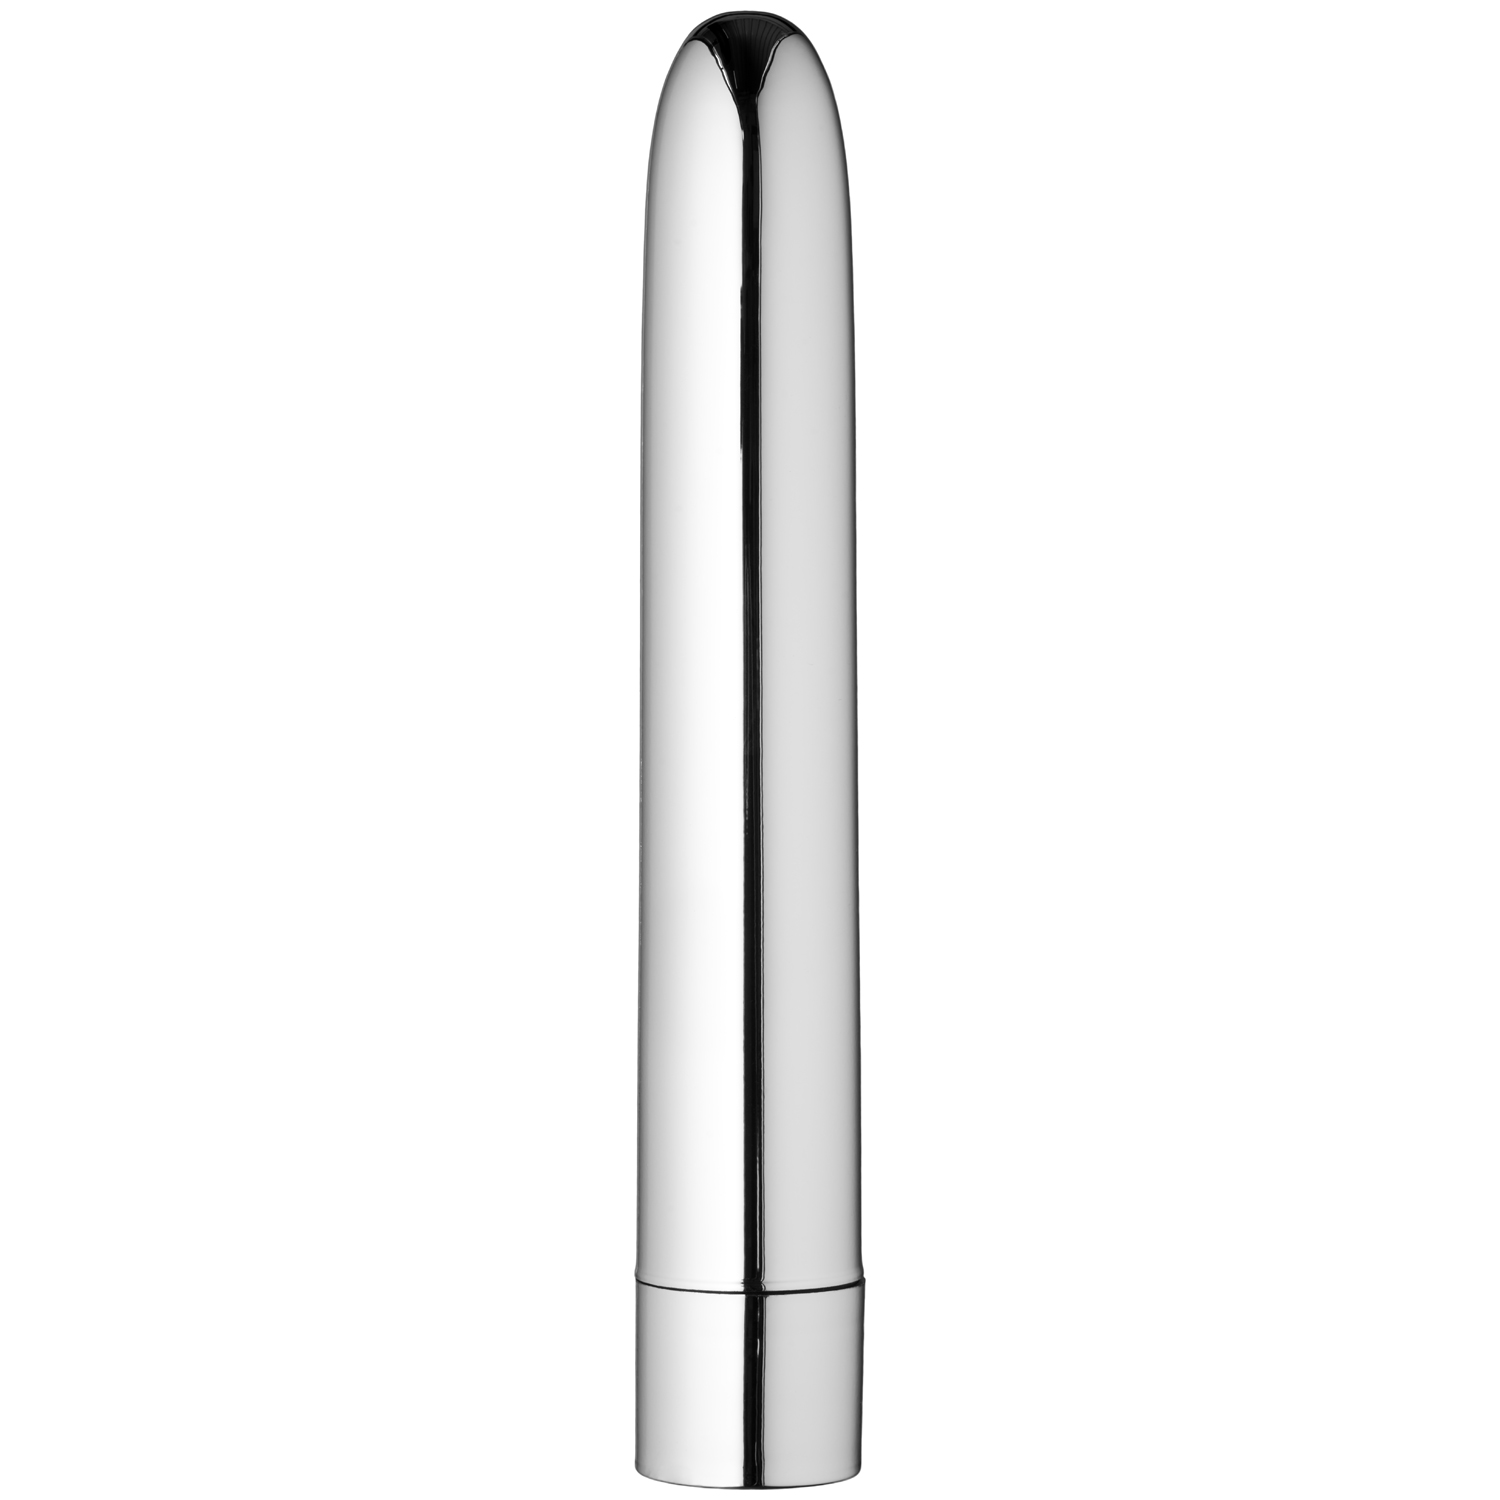 Sinful Silver Classic 10 Speed Dildovibrator   - Silver